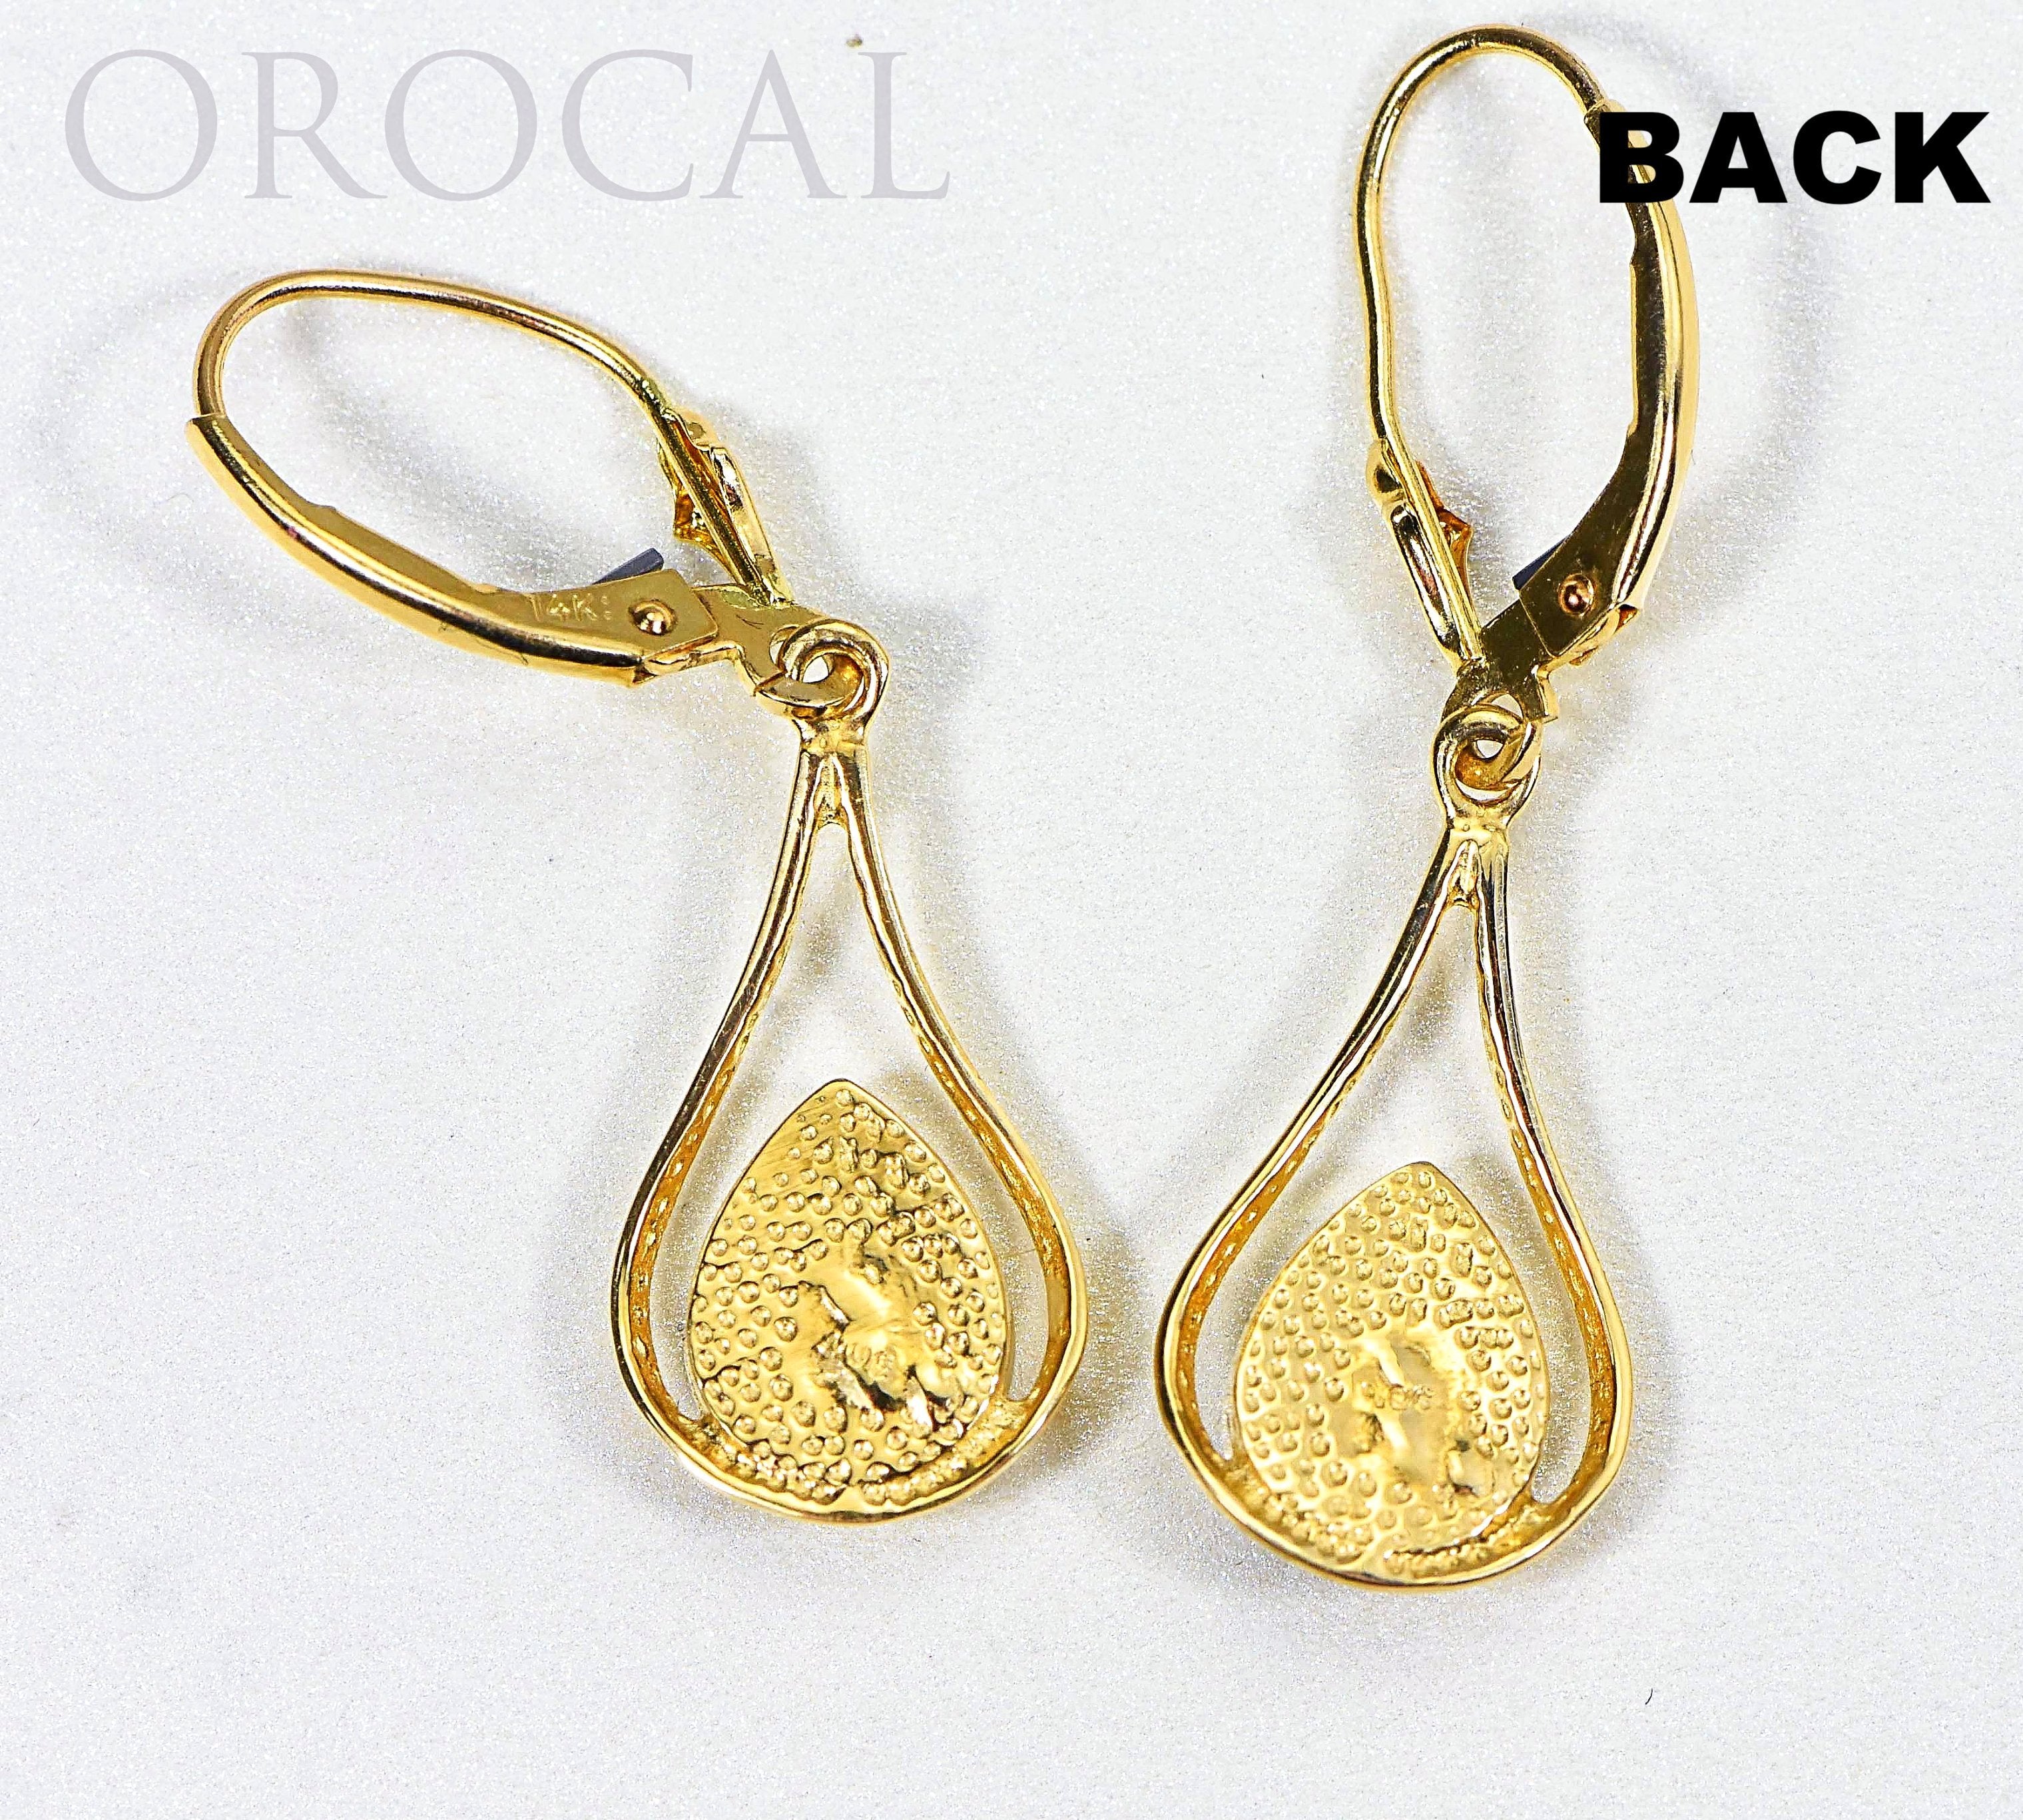 Gold Quartz Earrings "Orocal" EN869Q/LB Genuine Hand Crafted Jewelry - 14K Gold Casting